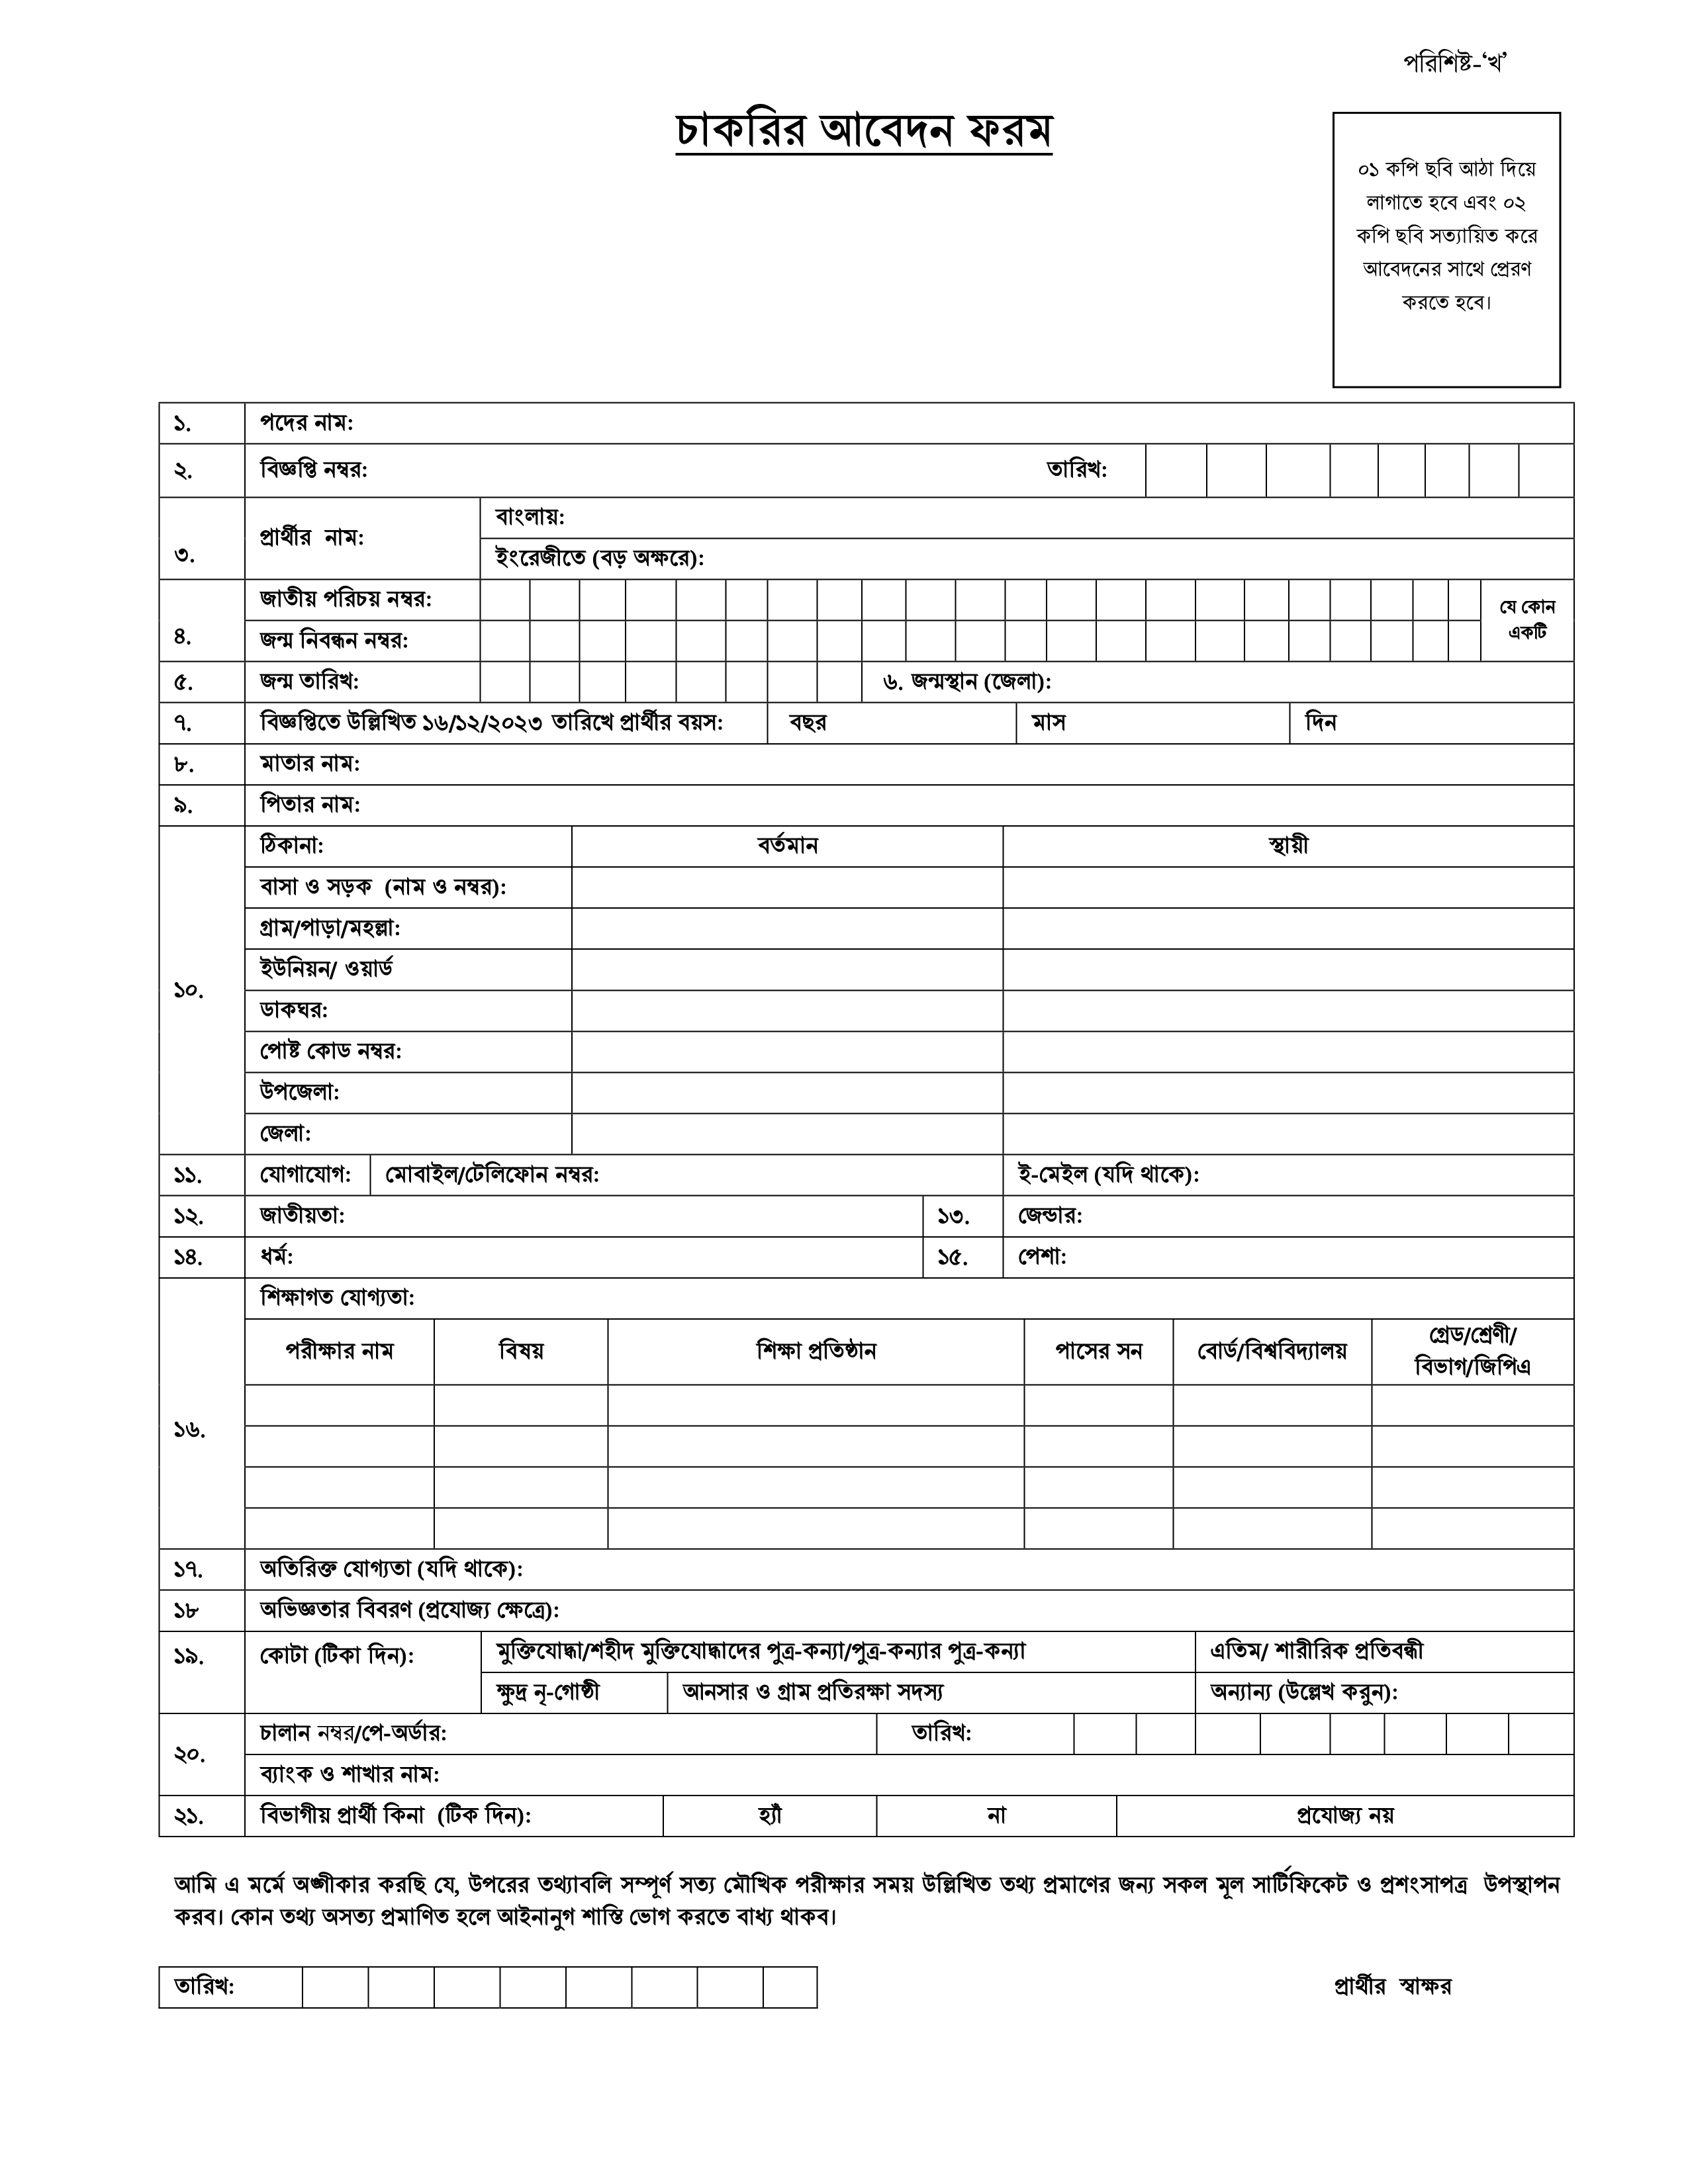 Chattogram Cantonment Board Form